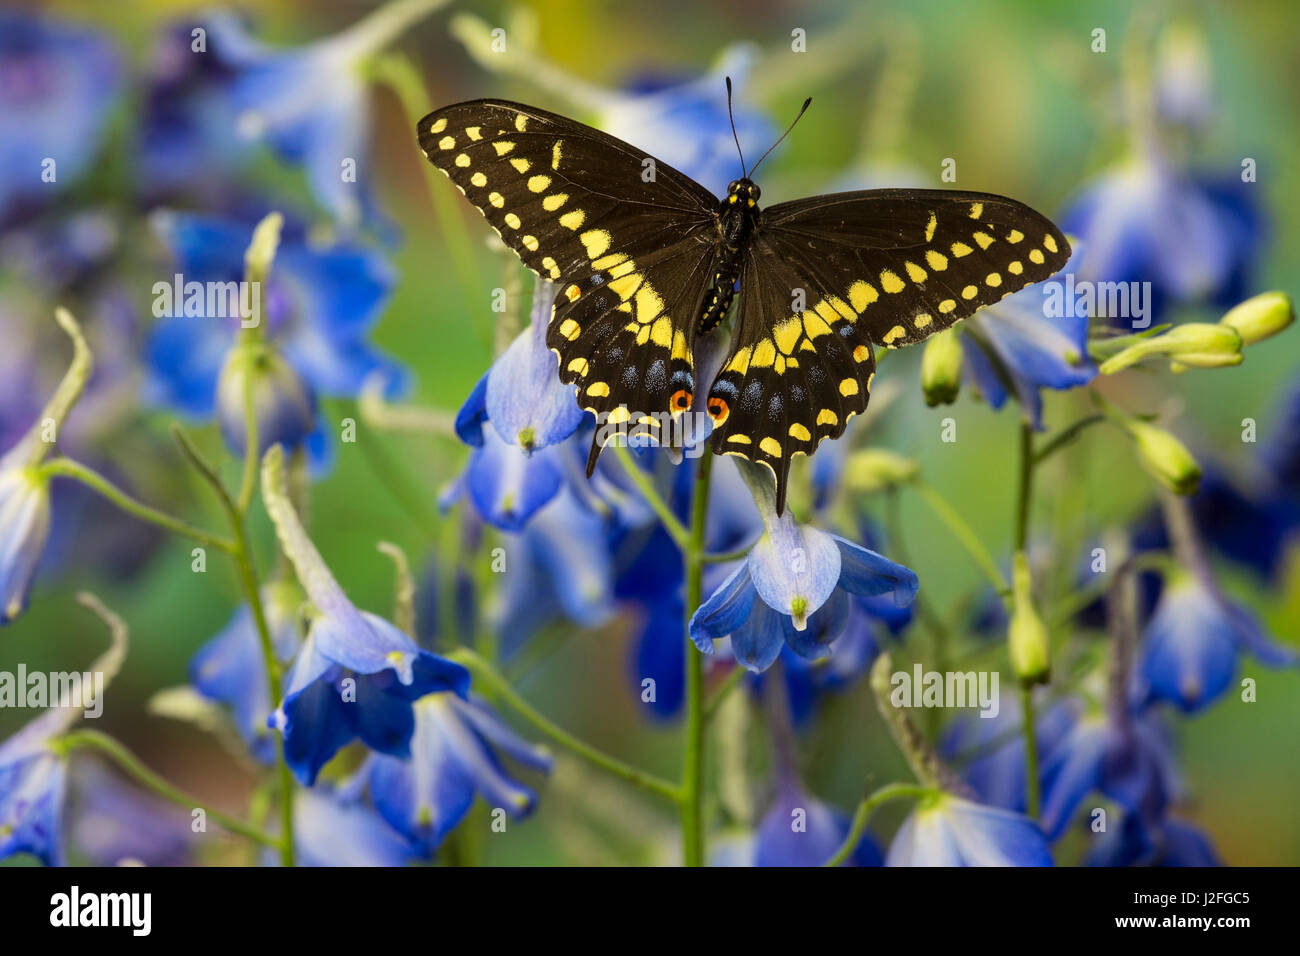 Black Swallowtail Butterfly, Papilio polyxenes from Costa Rica Stock Photo